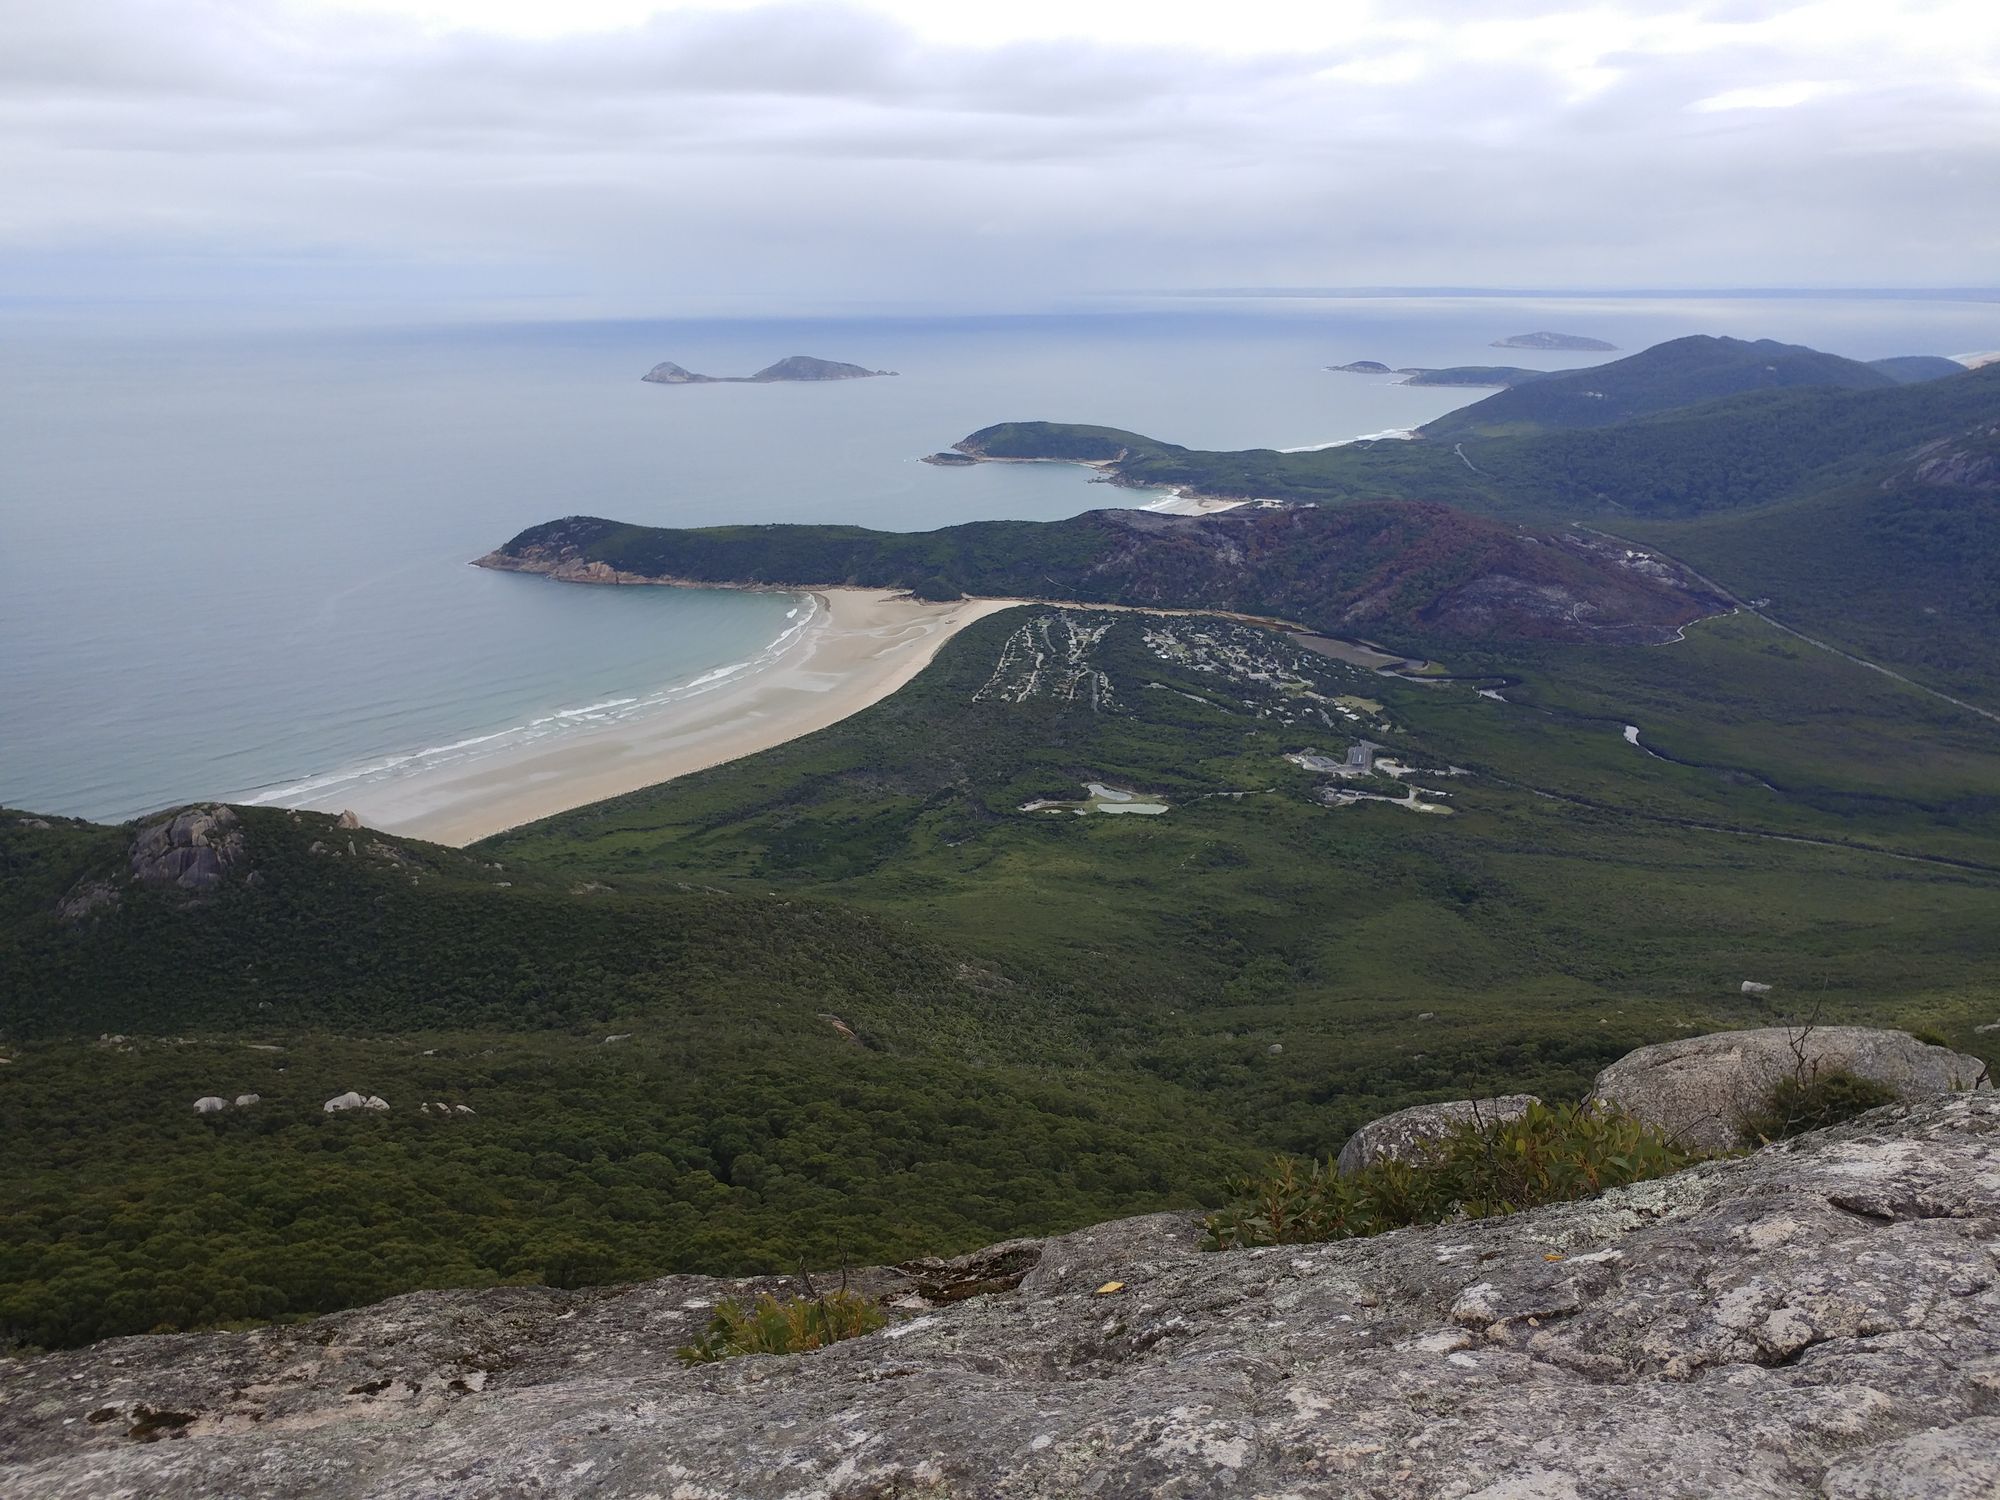 A view of the points of Wilson's Promontory from the top of Mount Oberon